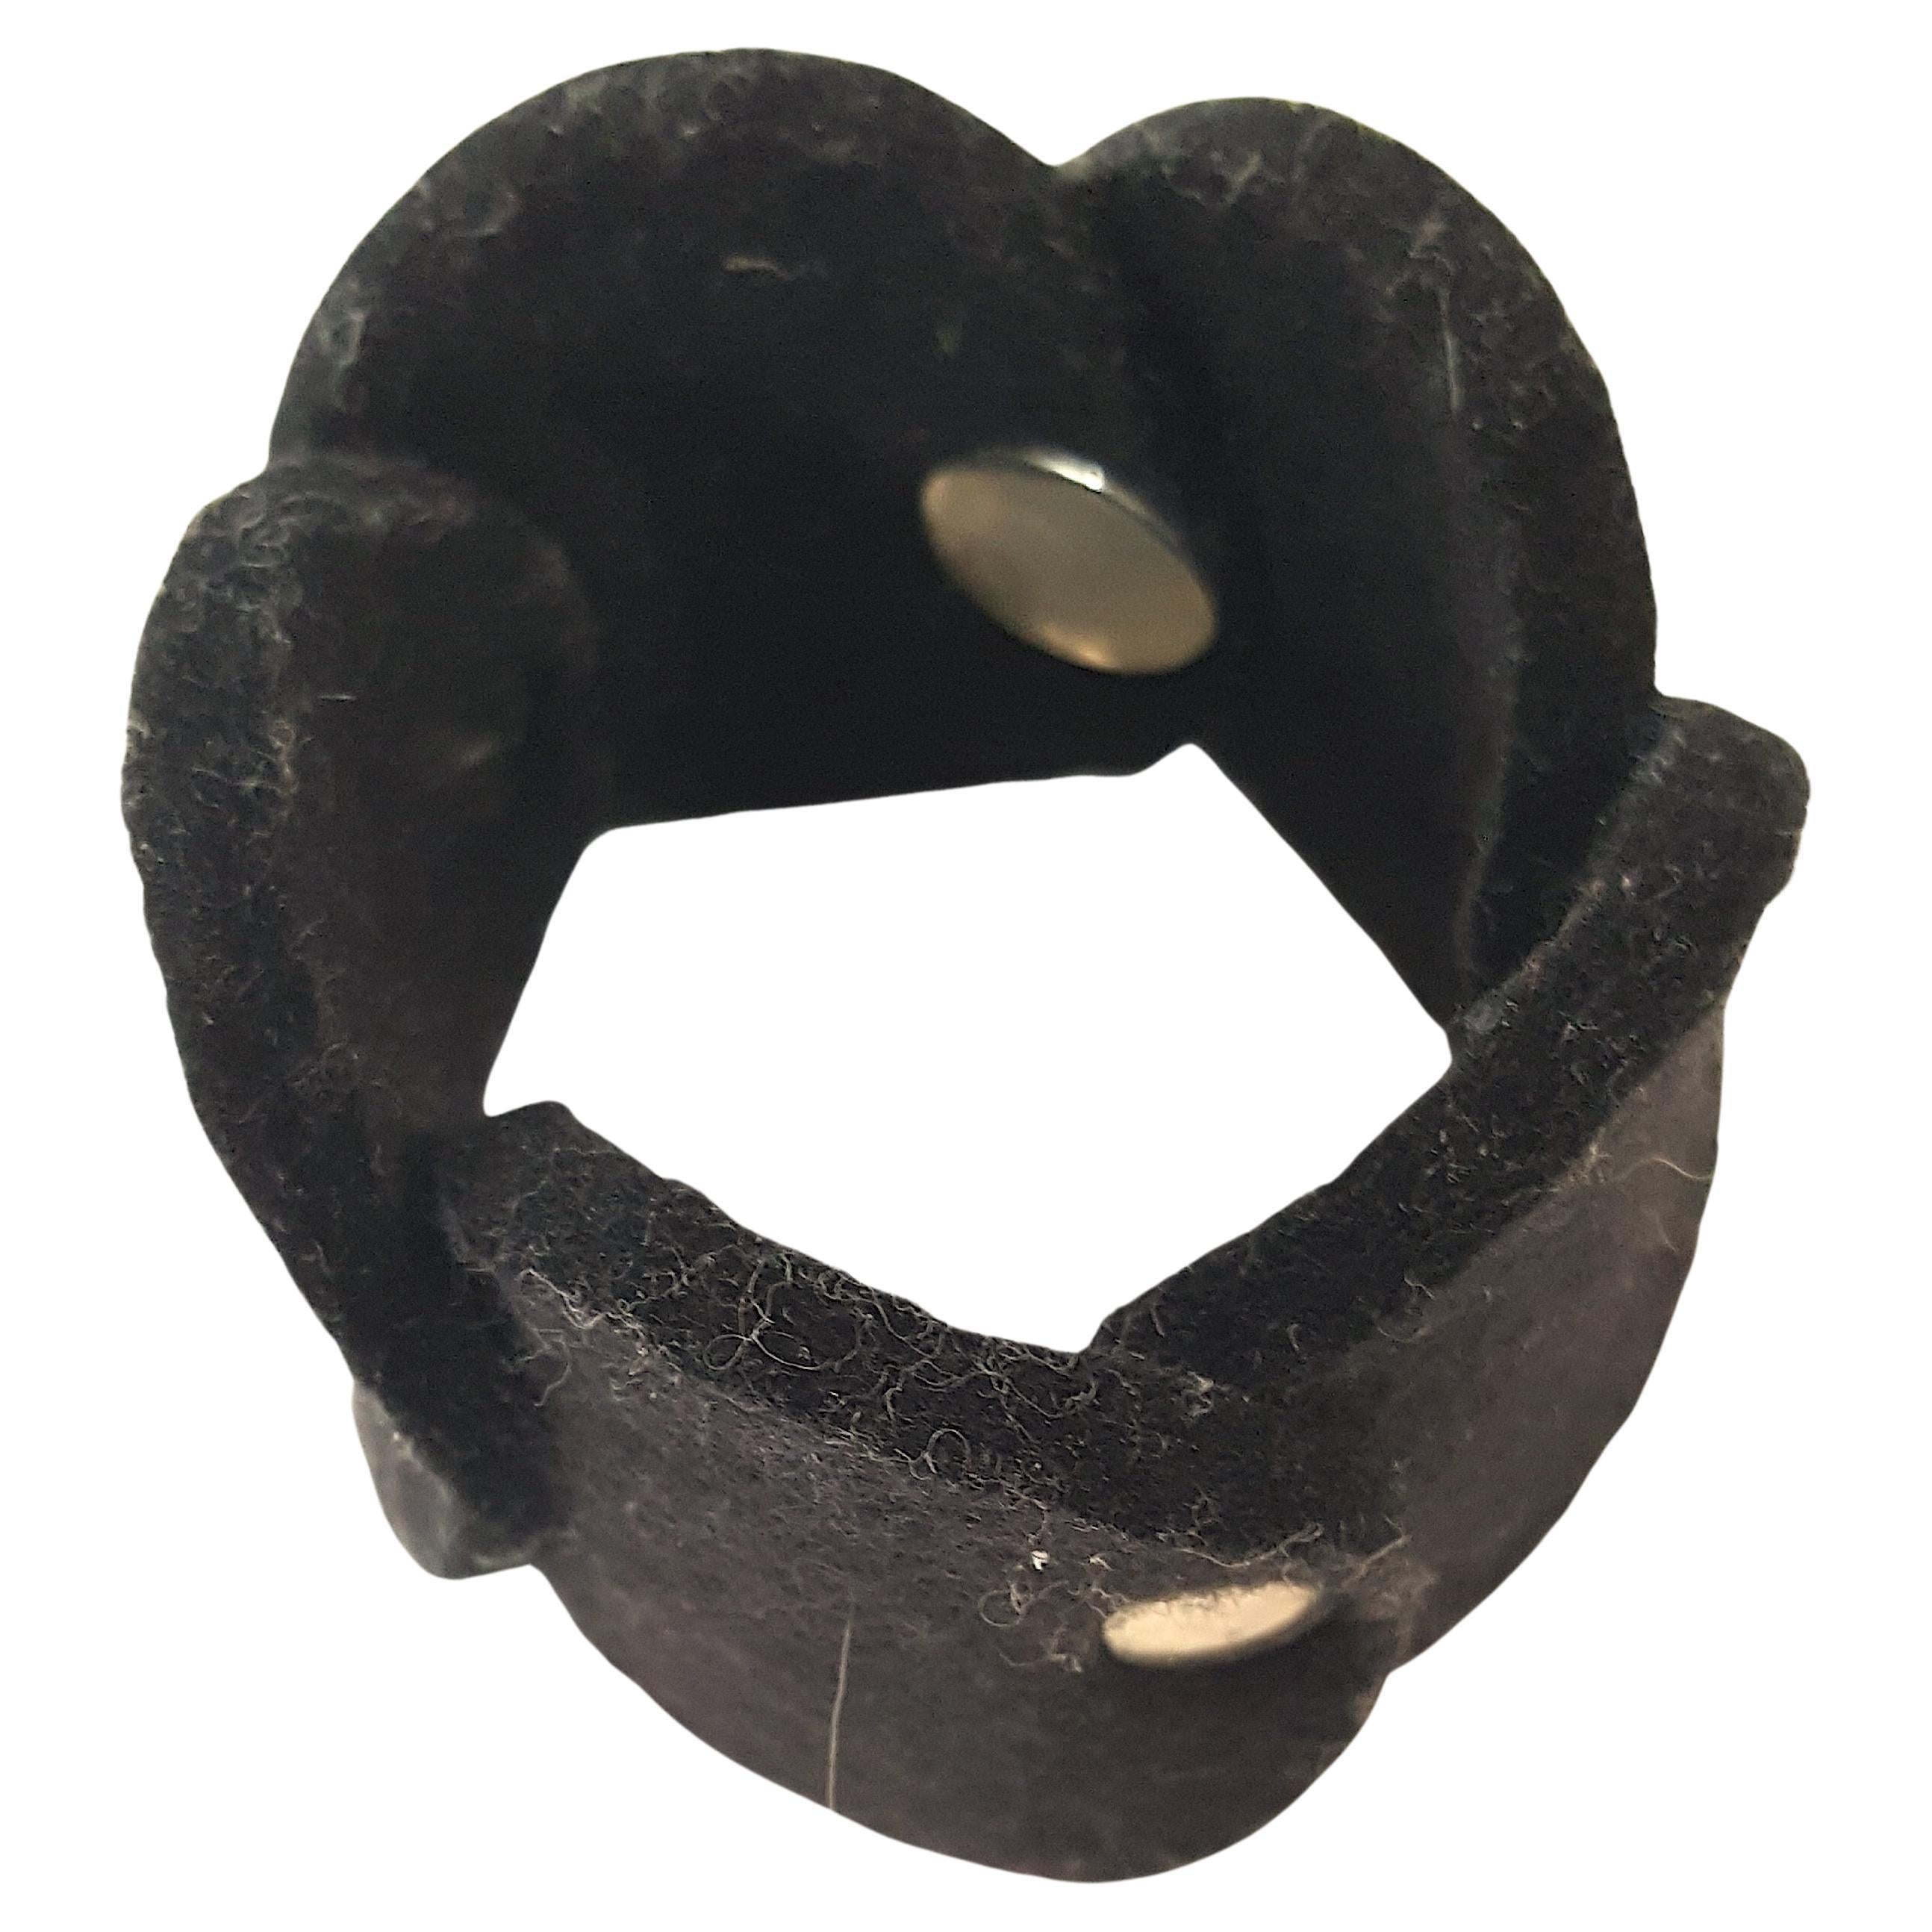 Swedish artist Pia Wallen made this modern bold black overlapping-discs link bracelet from her signature thick 
100%-wool felt, which is assembled with silver round hardware for interior snap closure at the one signed 